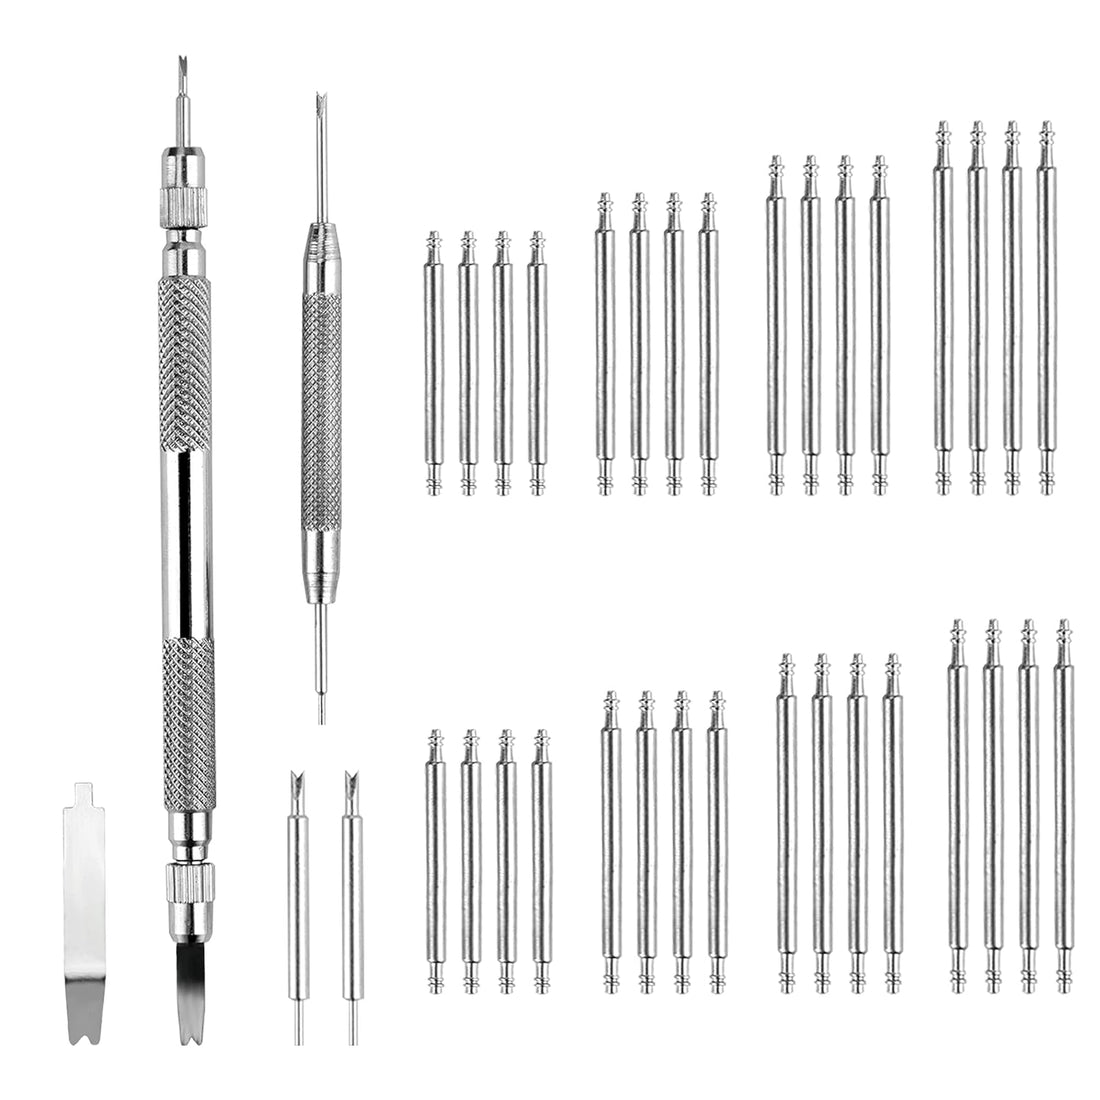 Spring Bar Tool Kit comes with 3 pins for wrist band/link removal and replacement and 40 additional stainless steel pins